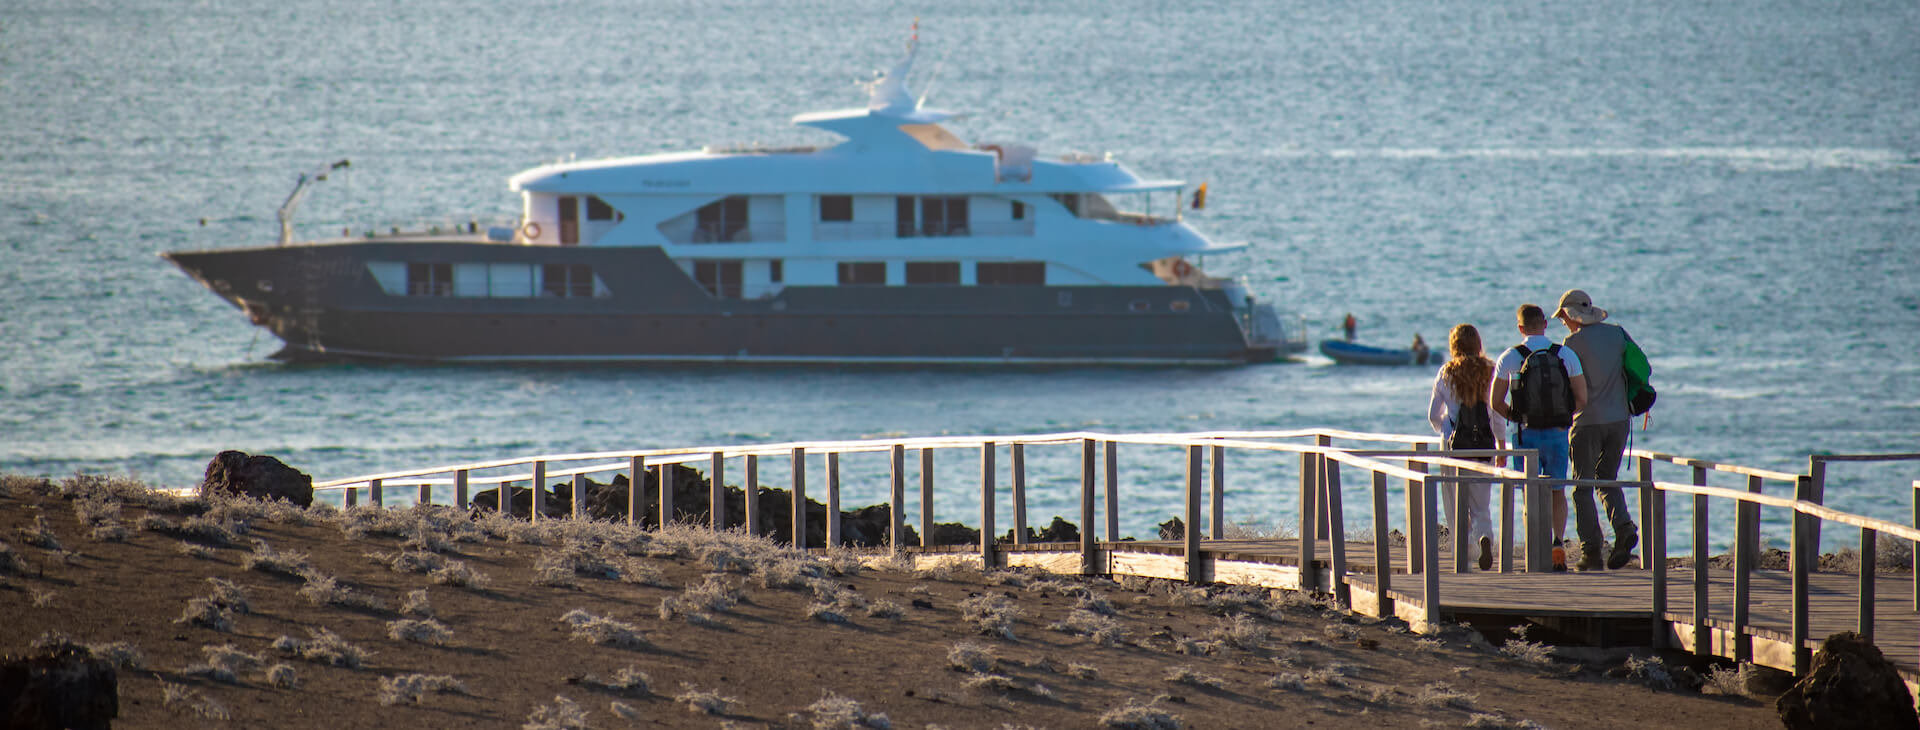 Infinity Motor Yacht Galapagos Cruise  Itineraries, Dates, Prices 2024/25  - Rainforest Cruises